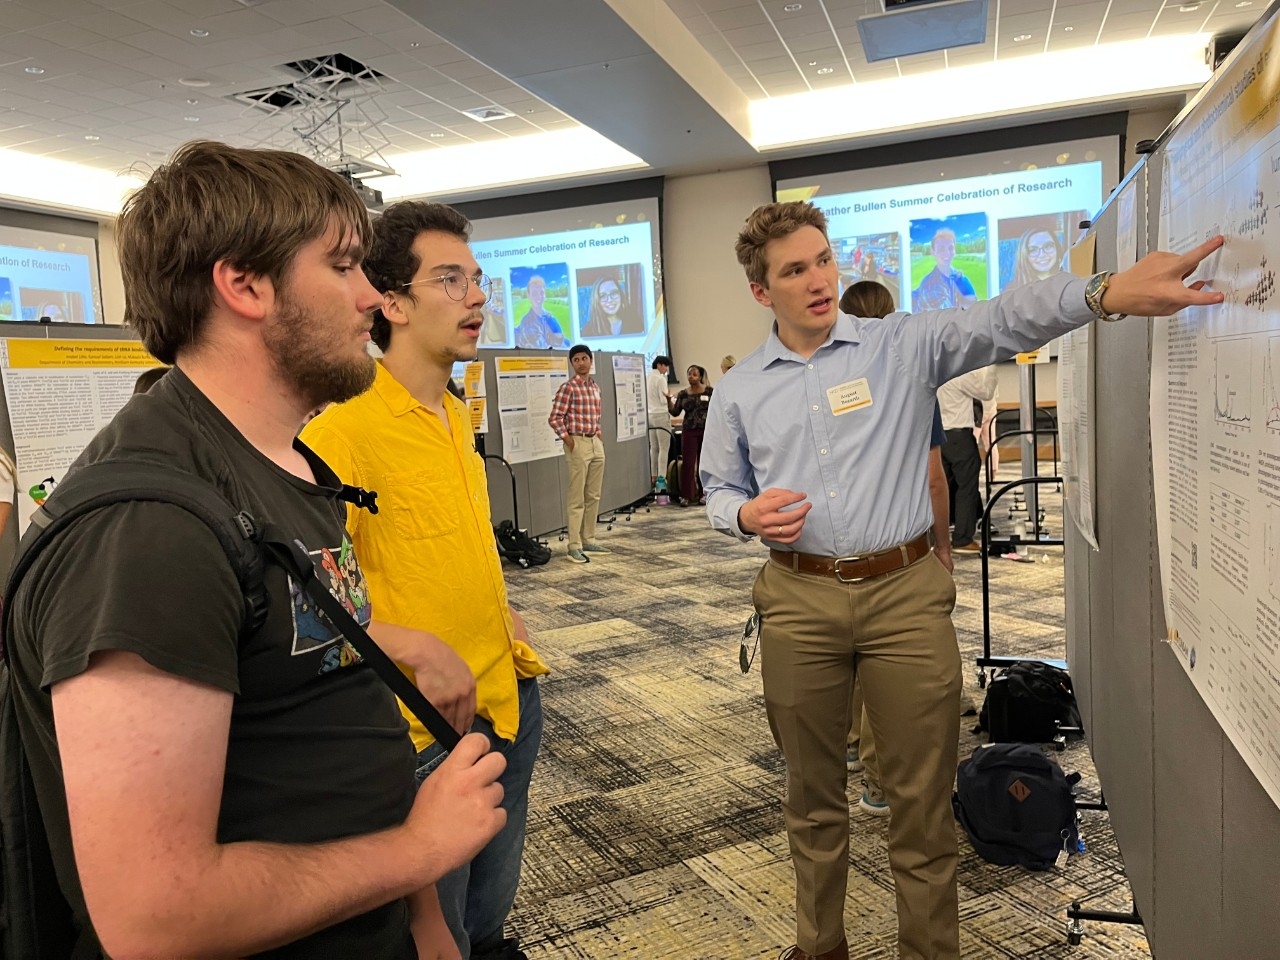 NKU student presents research poster to fellow students